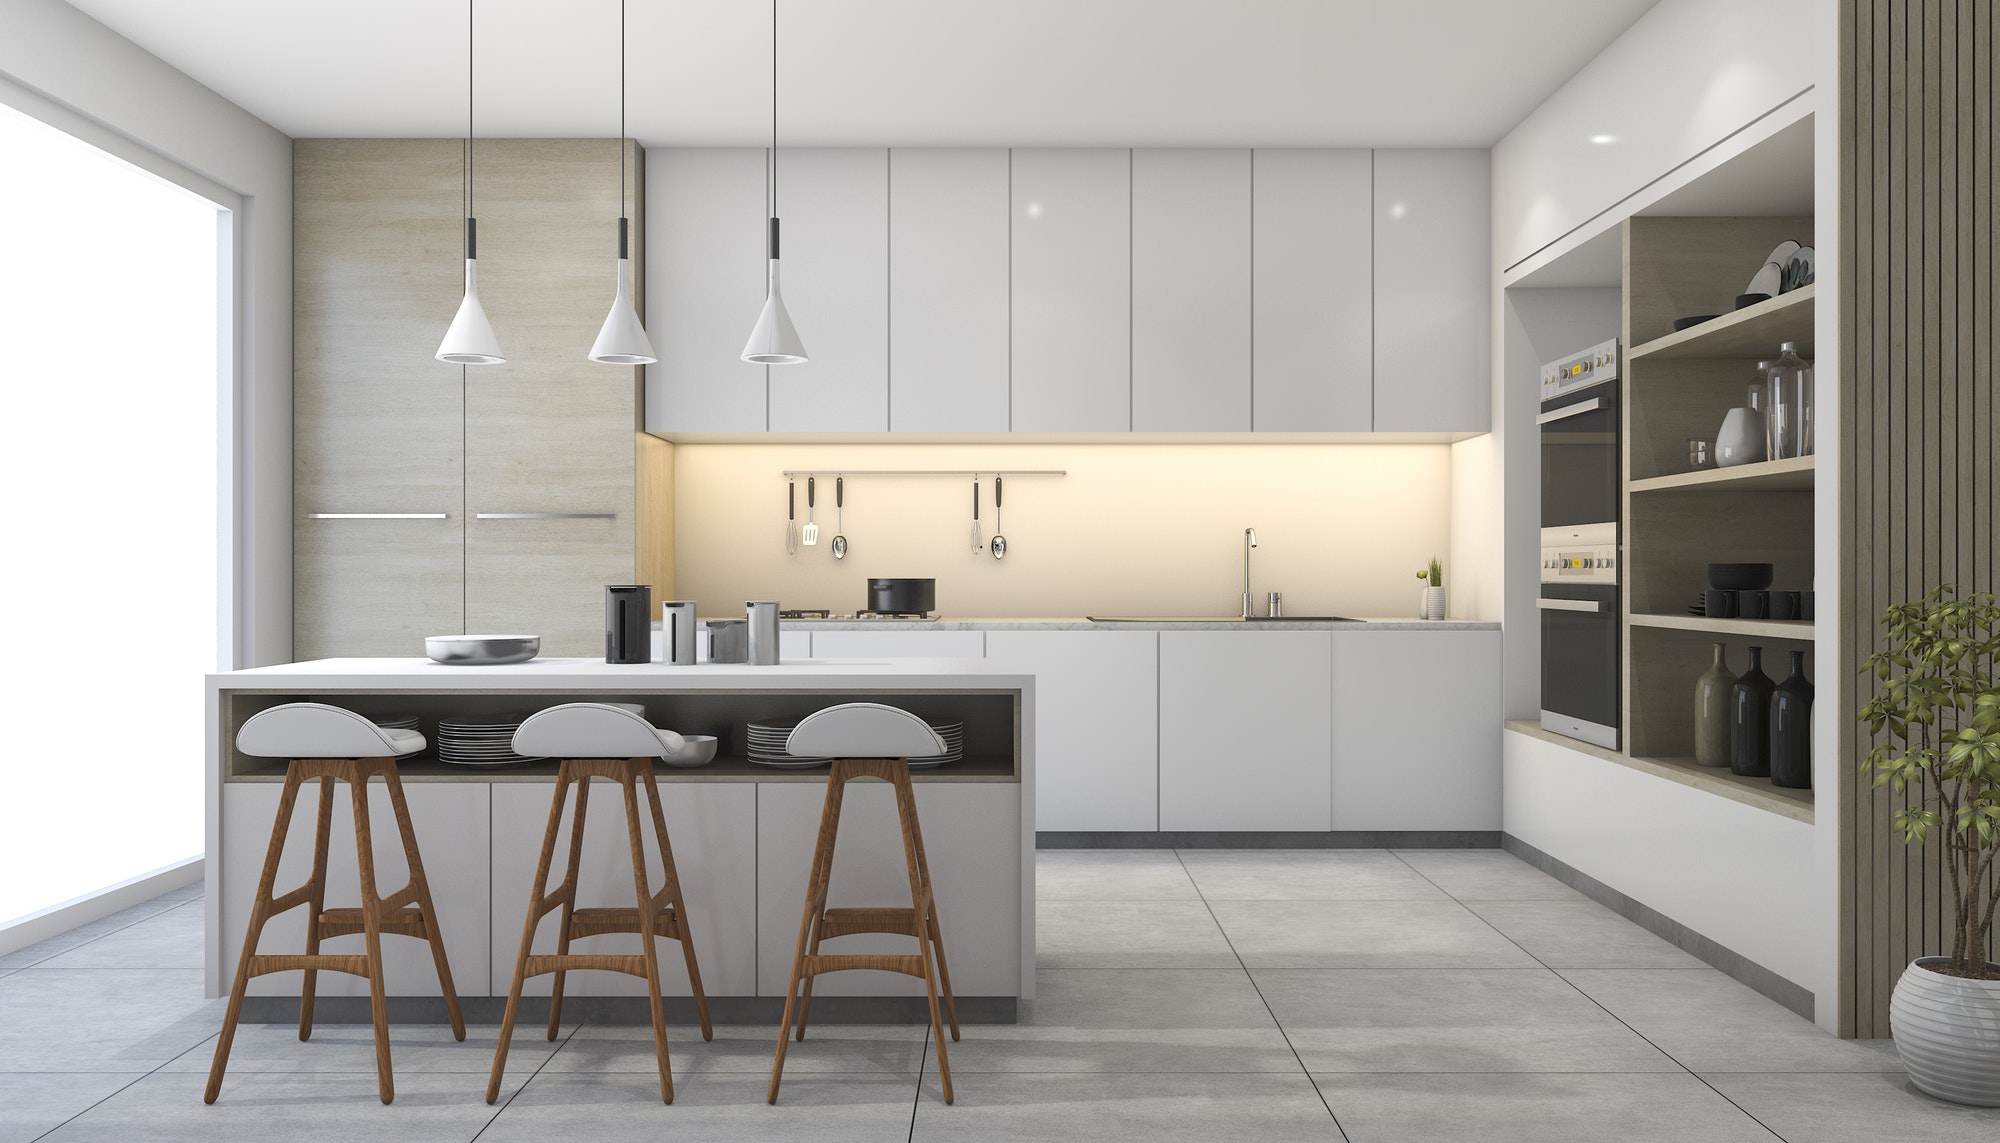 3d rendering white modern design kitchen with lamp